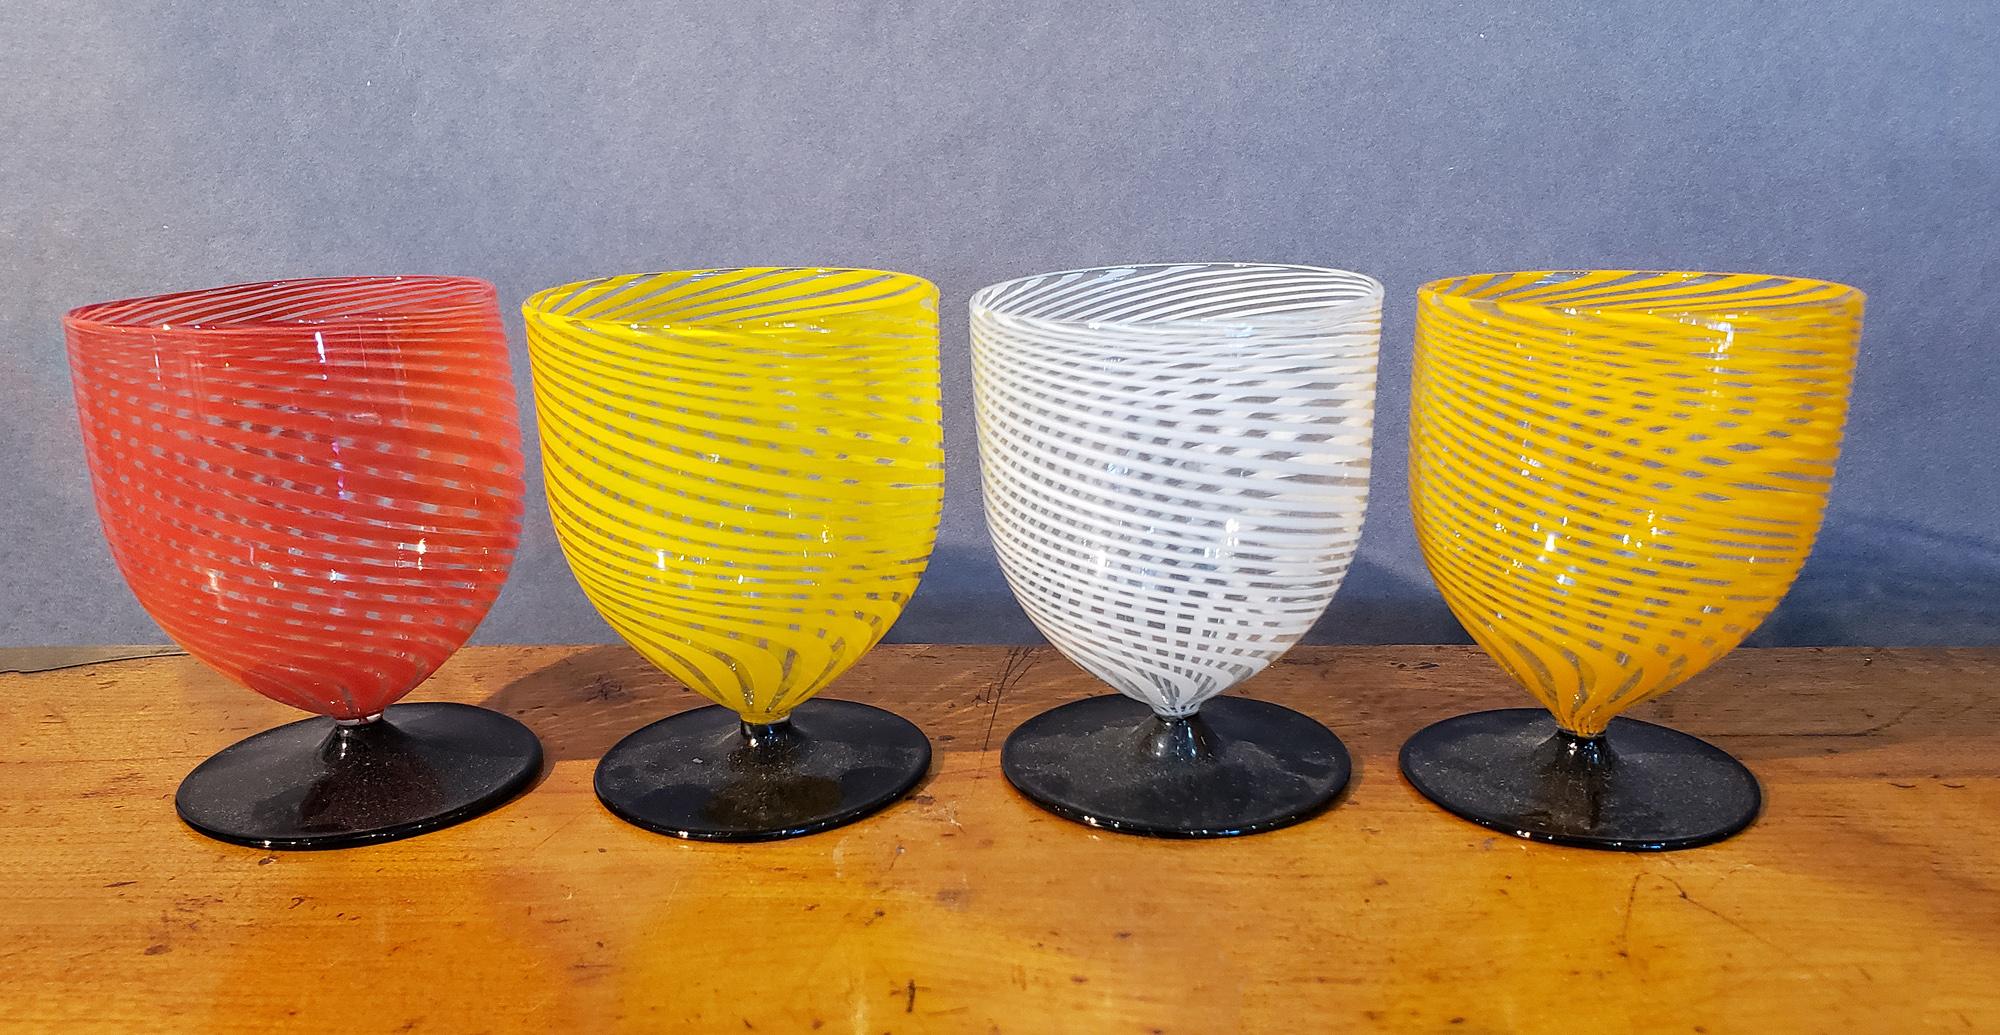 Bimini Swirl Cordial Glasses,
Austria
Set of Four,
The 1920s-30s

The four Bimini glasses, with a black wide foot, each have a different colored swirl- yellow, orange blue, and white

Dimensions: 3 inches high x 2 1/4 diameter at the rim.
 